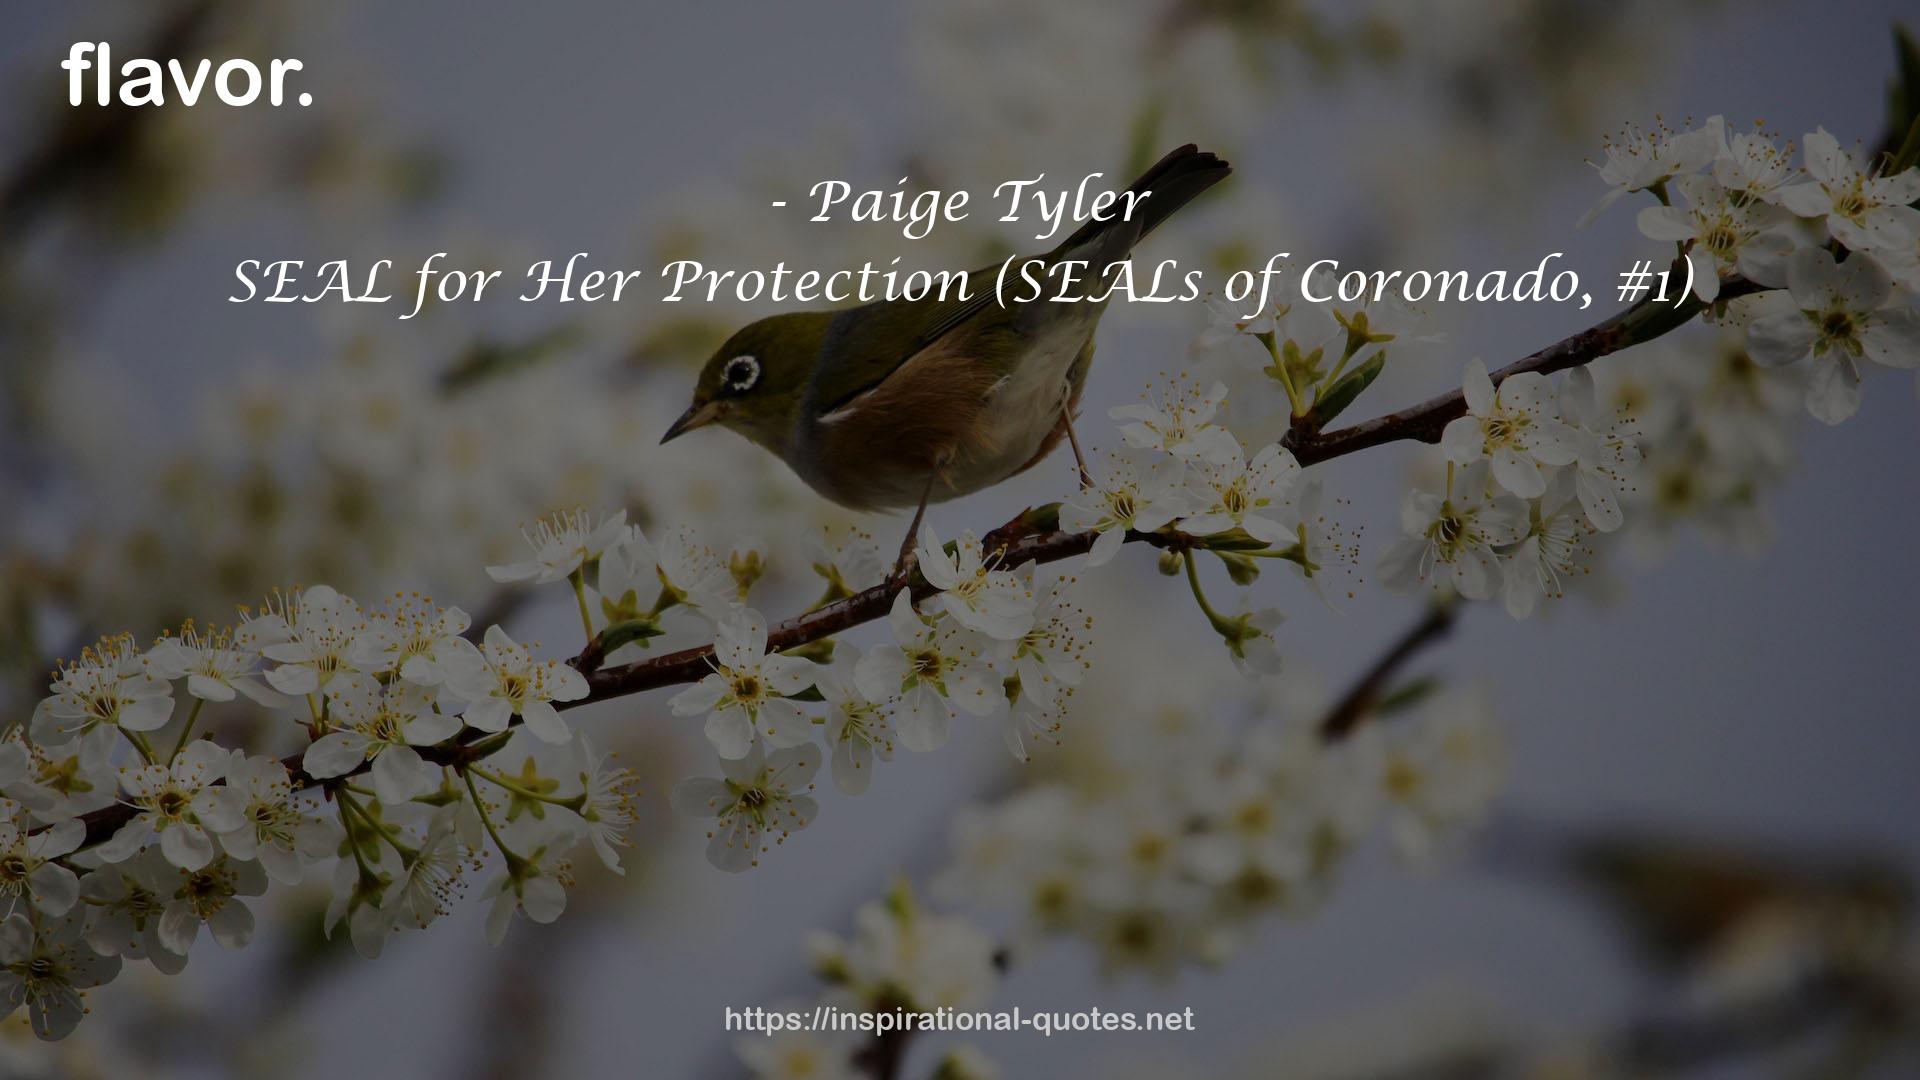 SEAL for Her Protection (SEALs of Coronado, #1) QUOTES